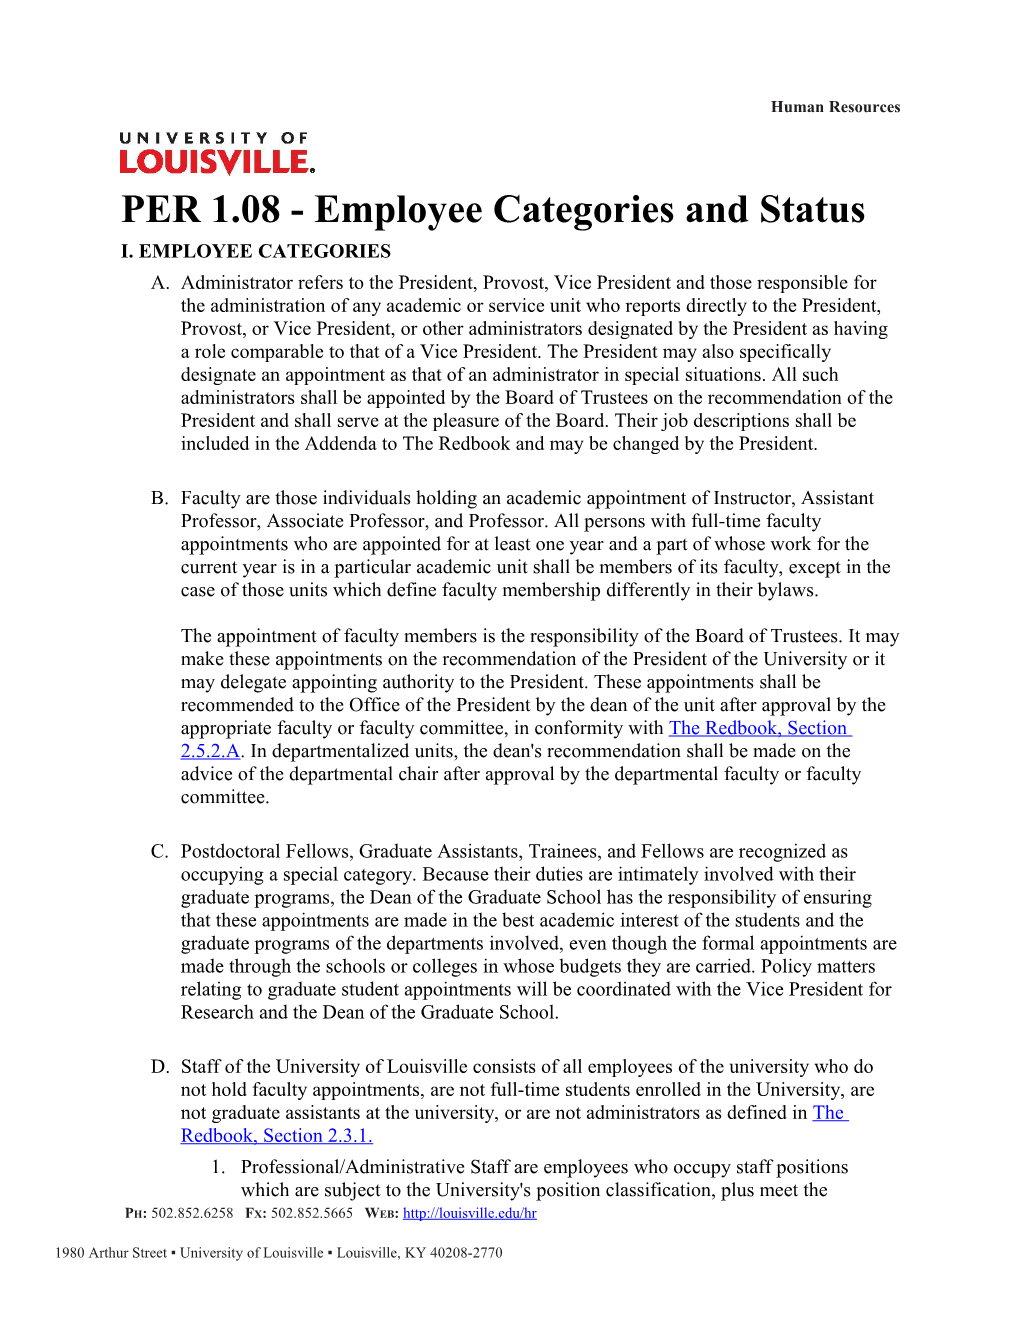 Employee Categories and Status